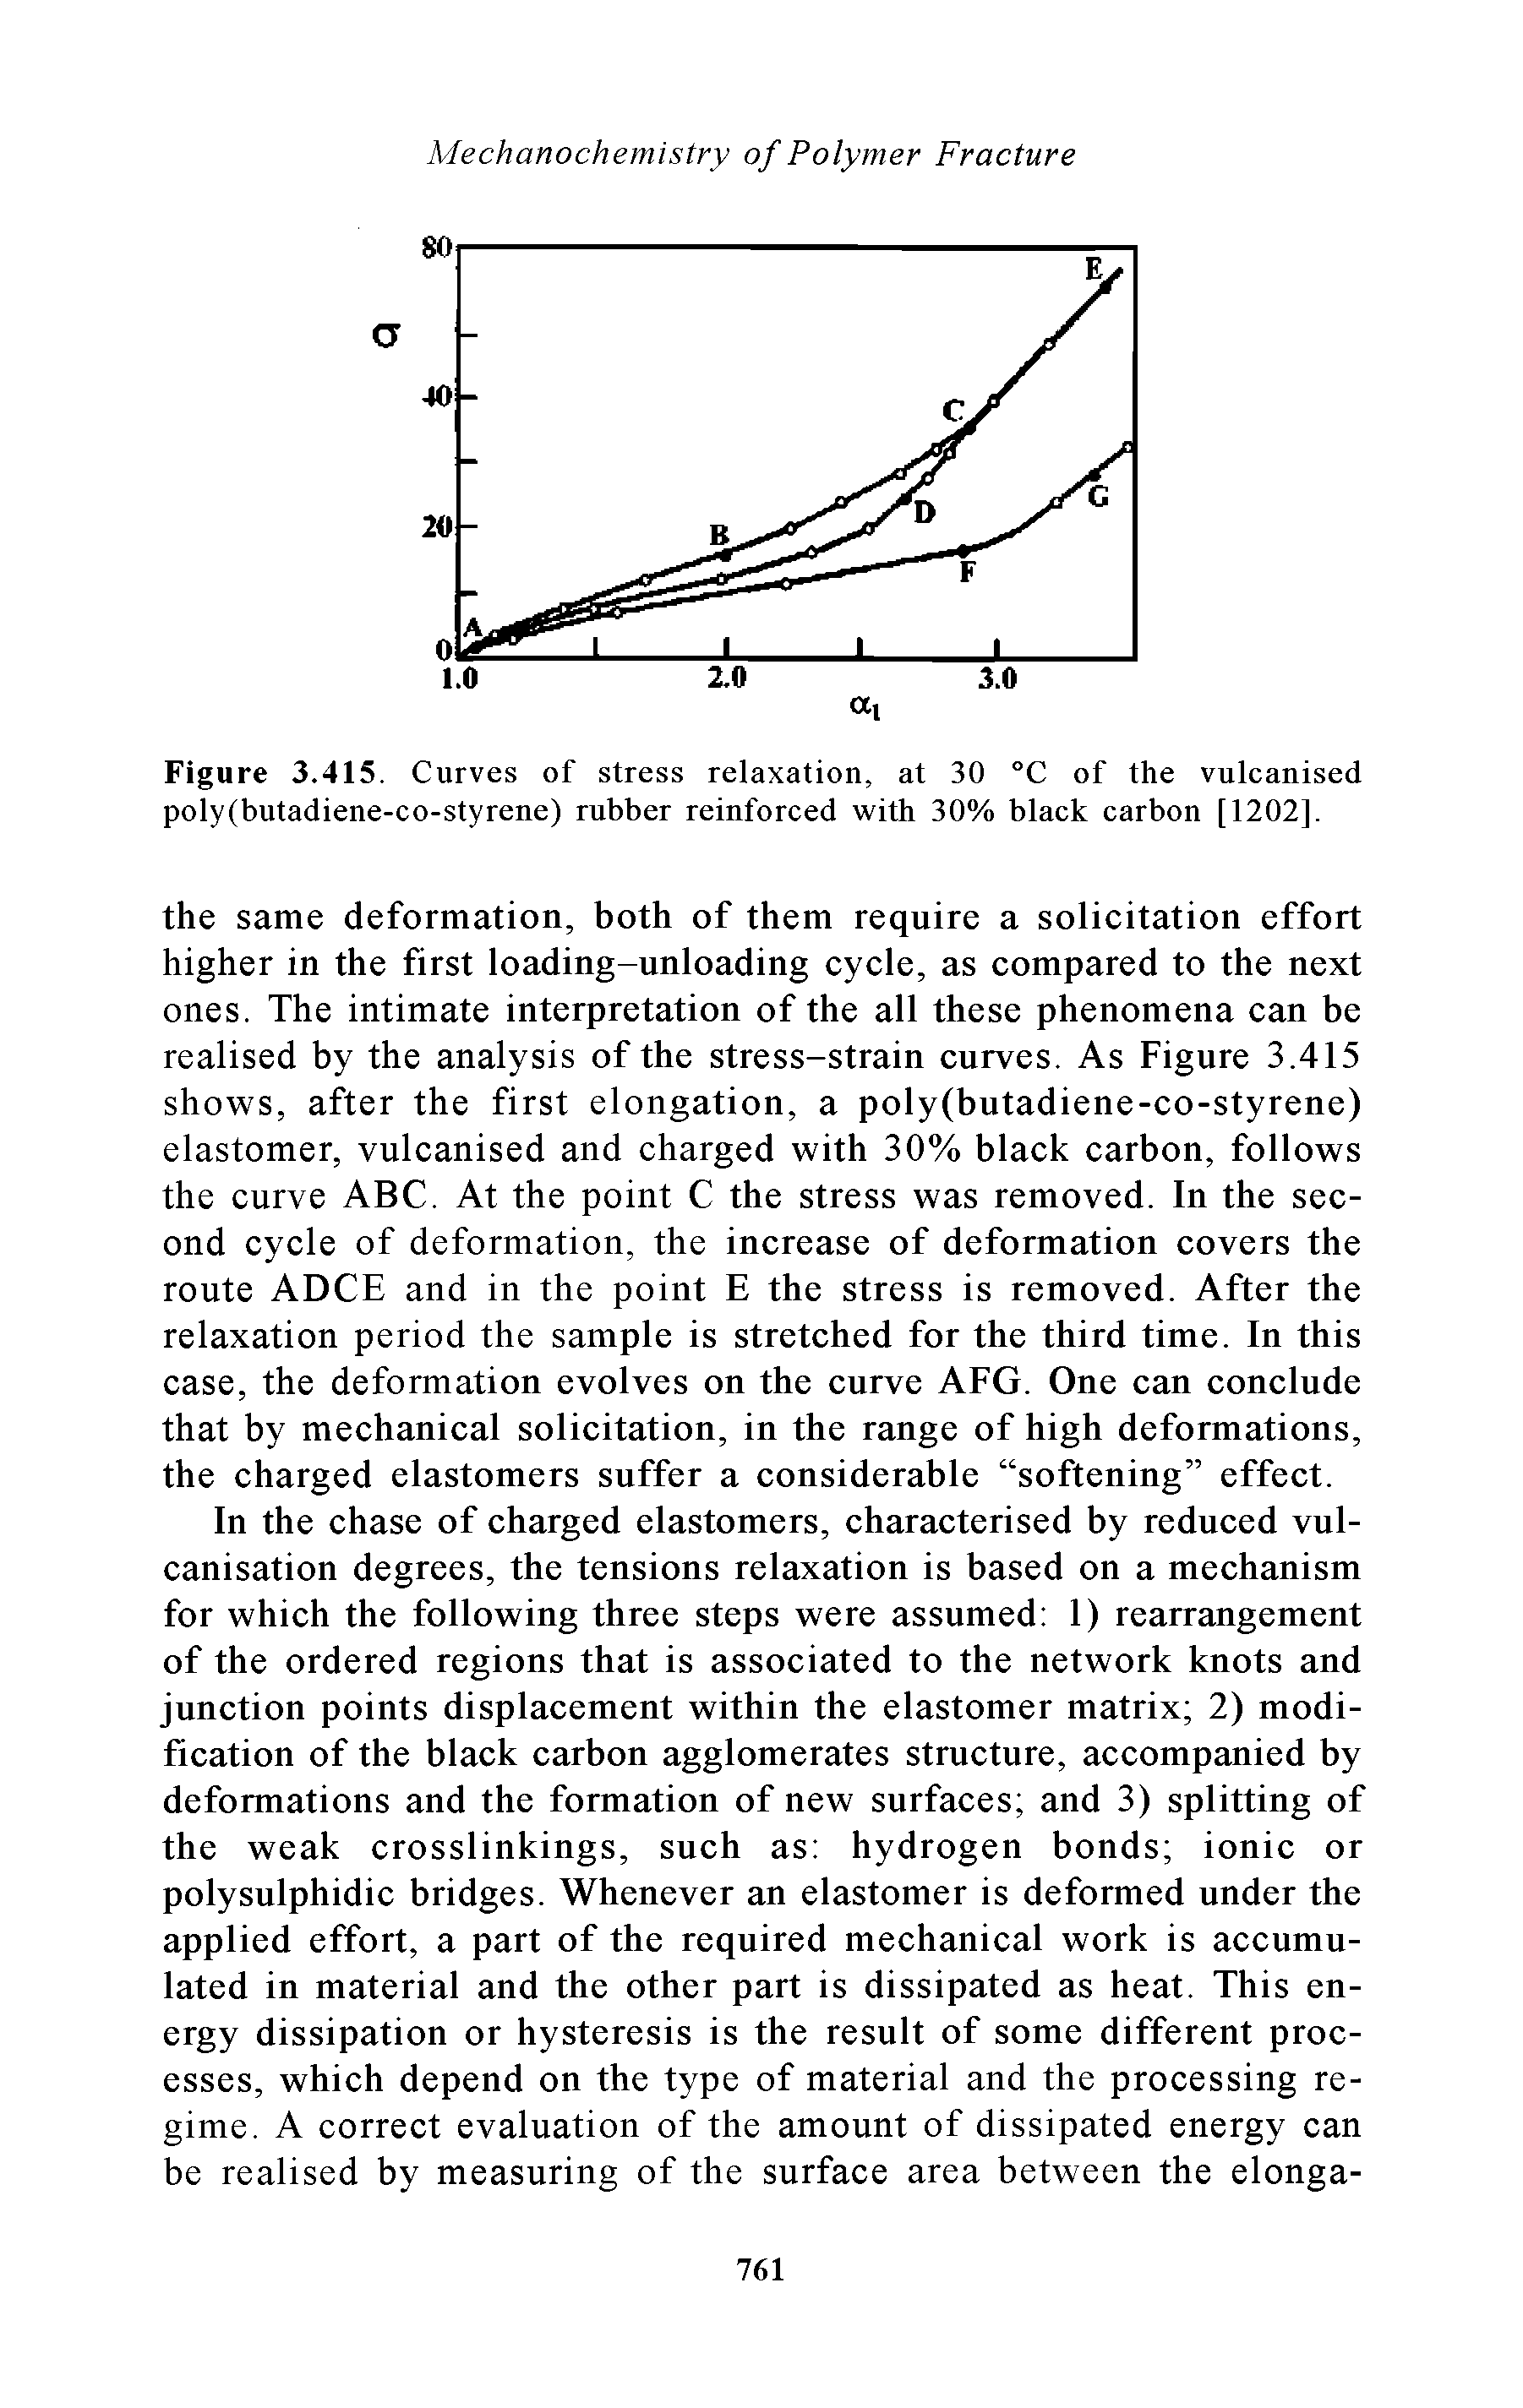 Figure 3.415. Curves of stress relaxation, at 30 °C of the vulcanised poly(butadiene-co-styrene) rubber reinforced with 30% black carbon [1202].